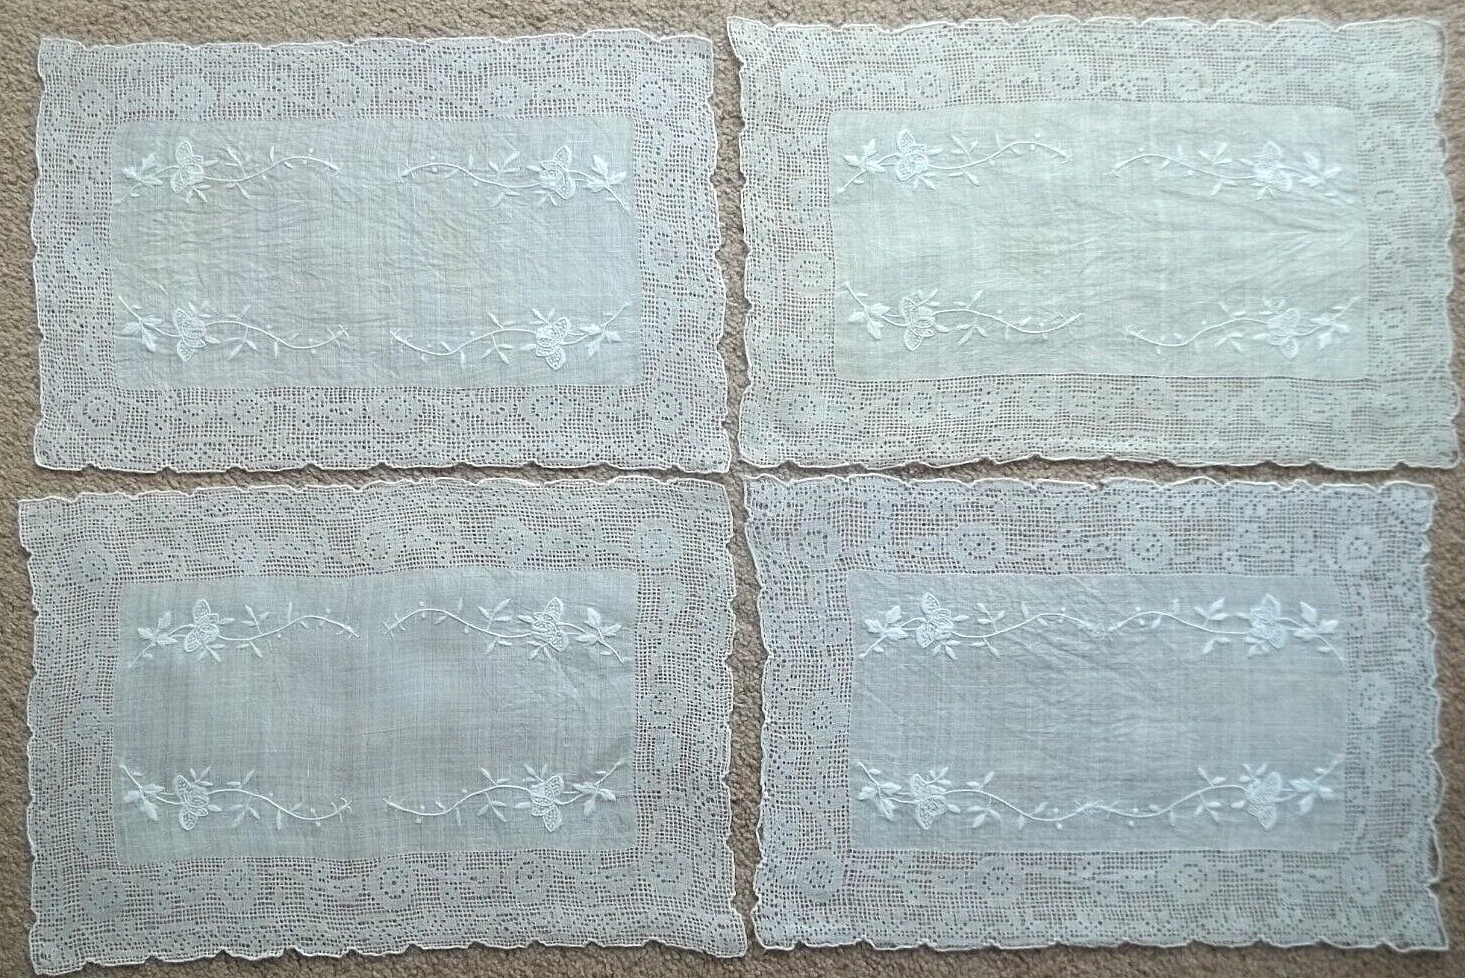 Set 4 Beautiful Vtg White Cotton Embroidered Floral Drawn Work? Lace Placemats